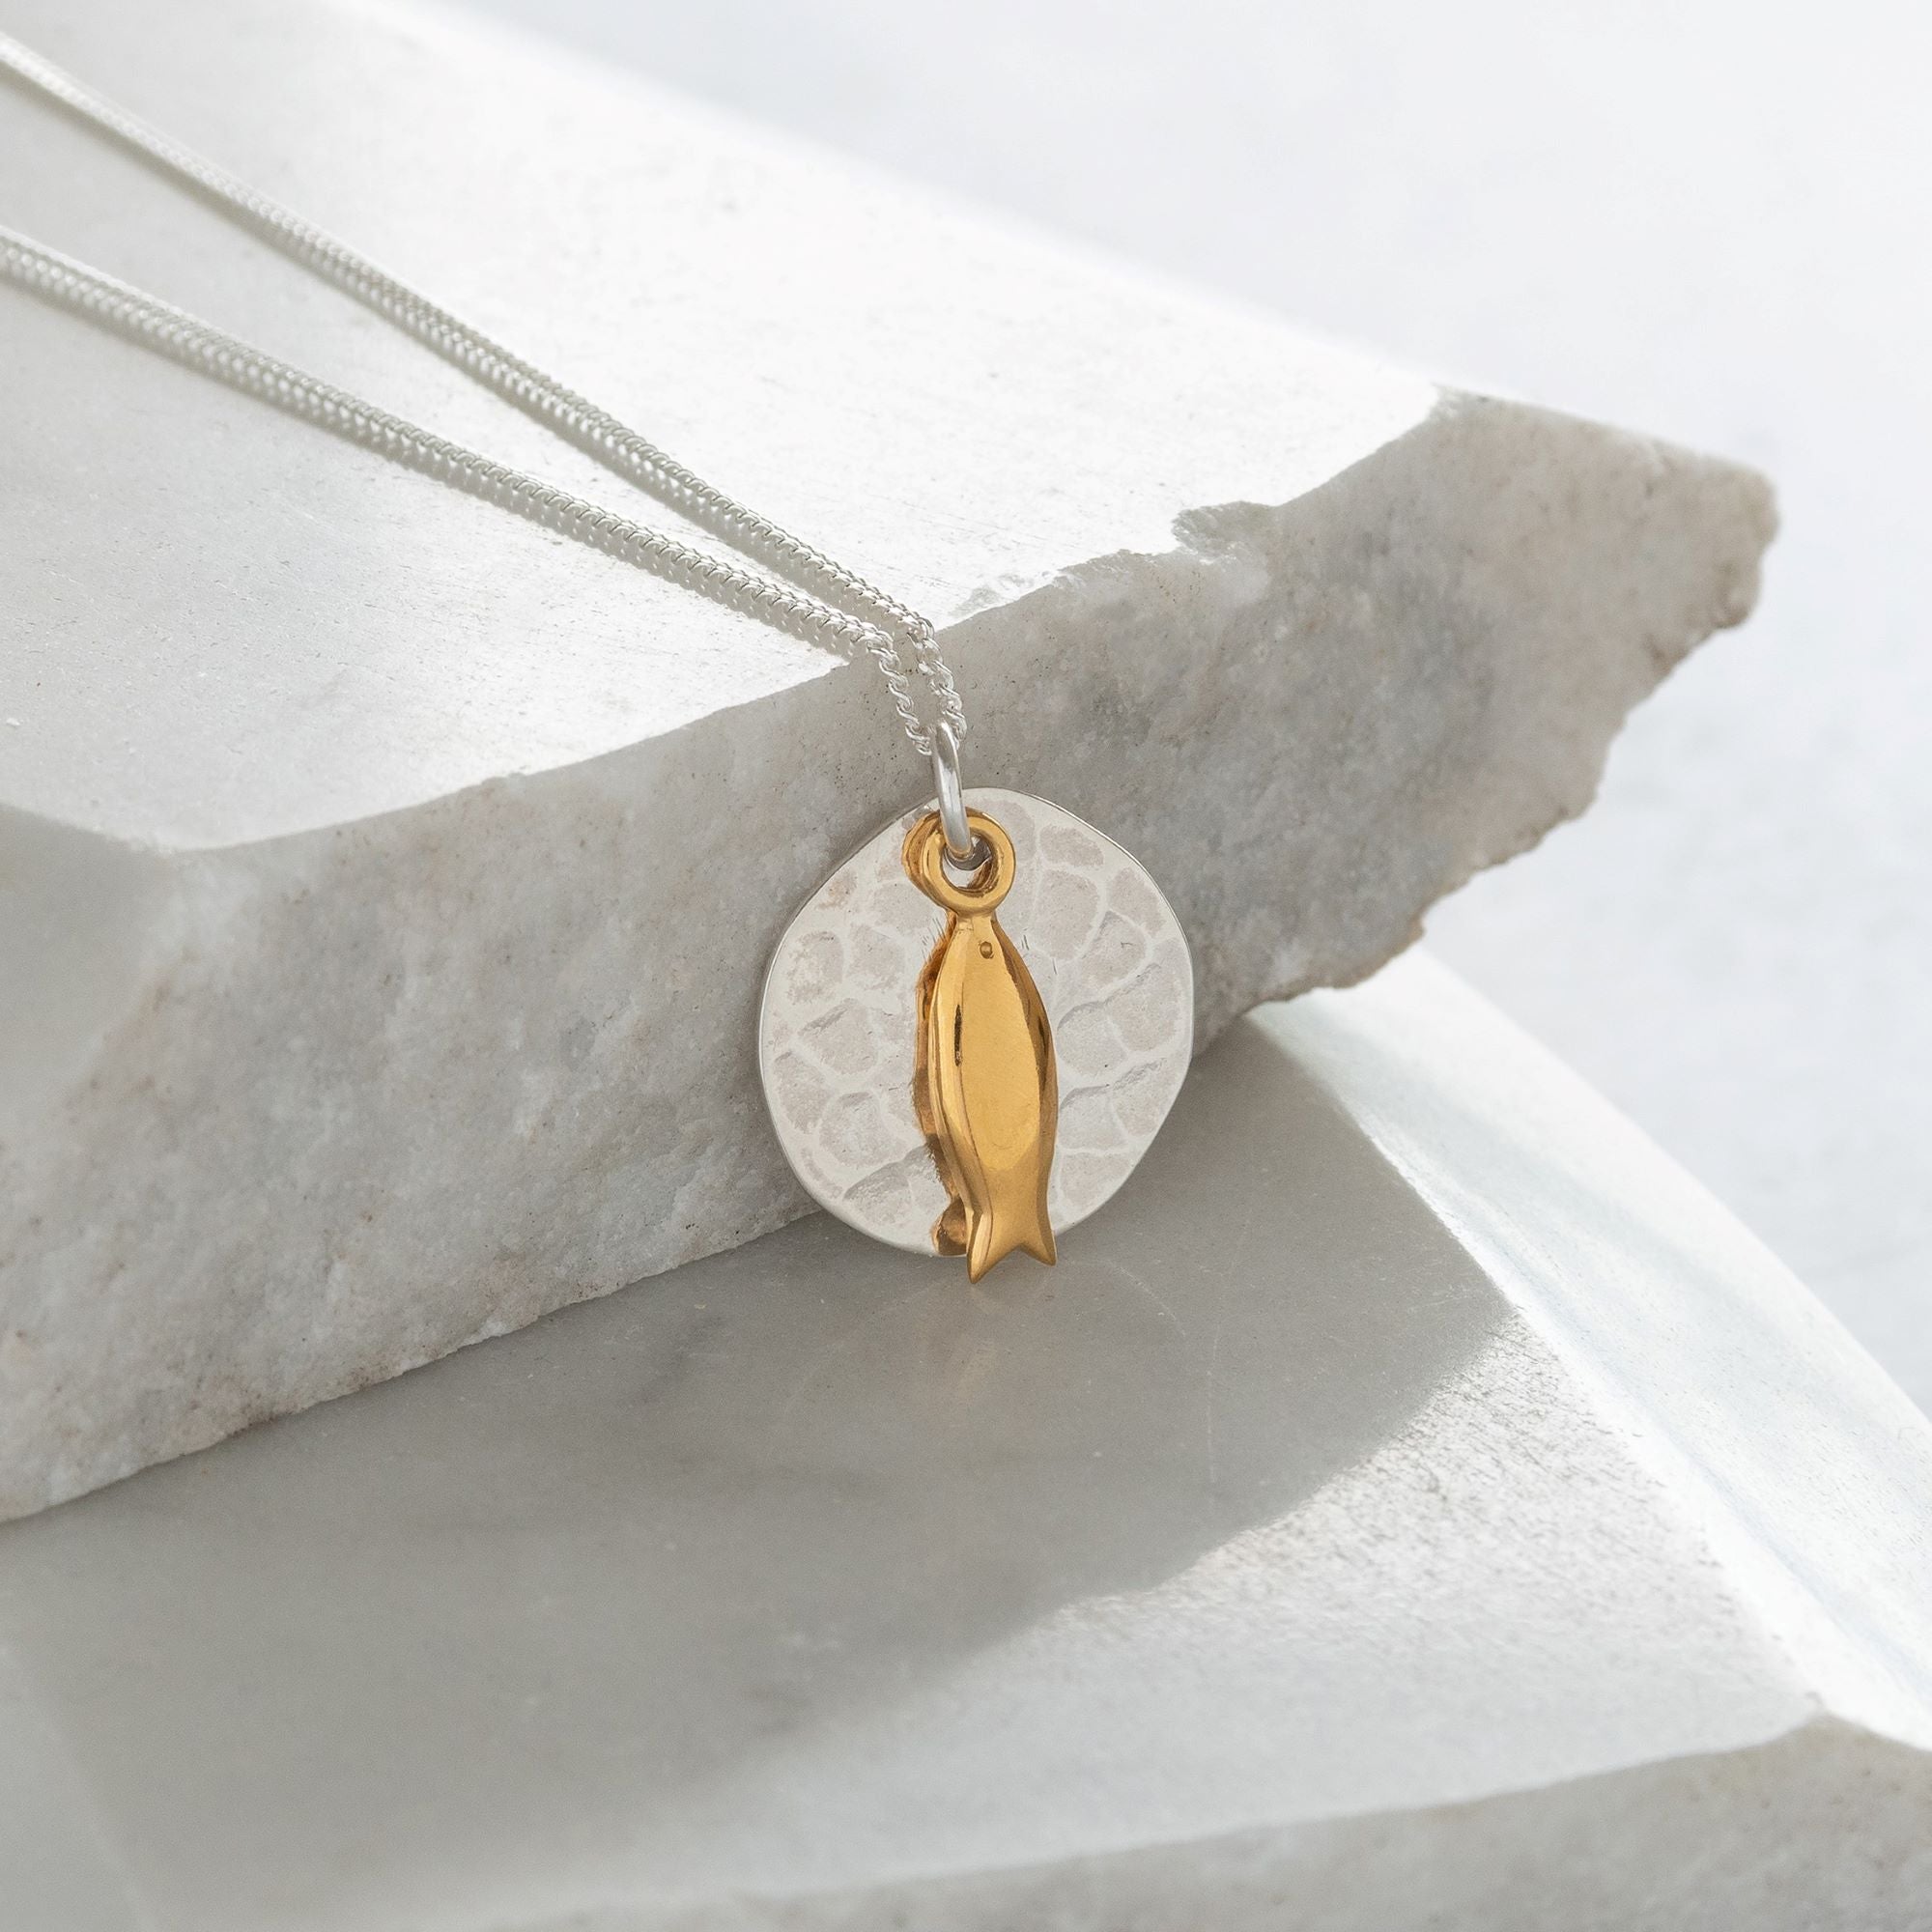 Hammered Disc with Fish Necklace Sterling Silver and Vermeil